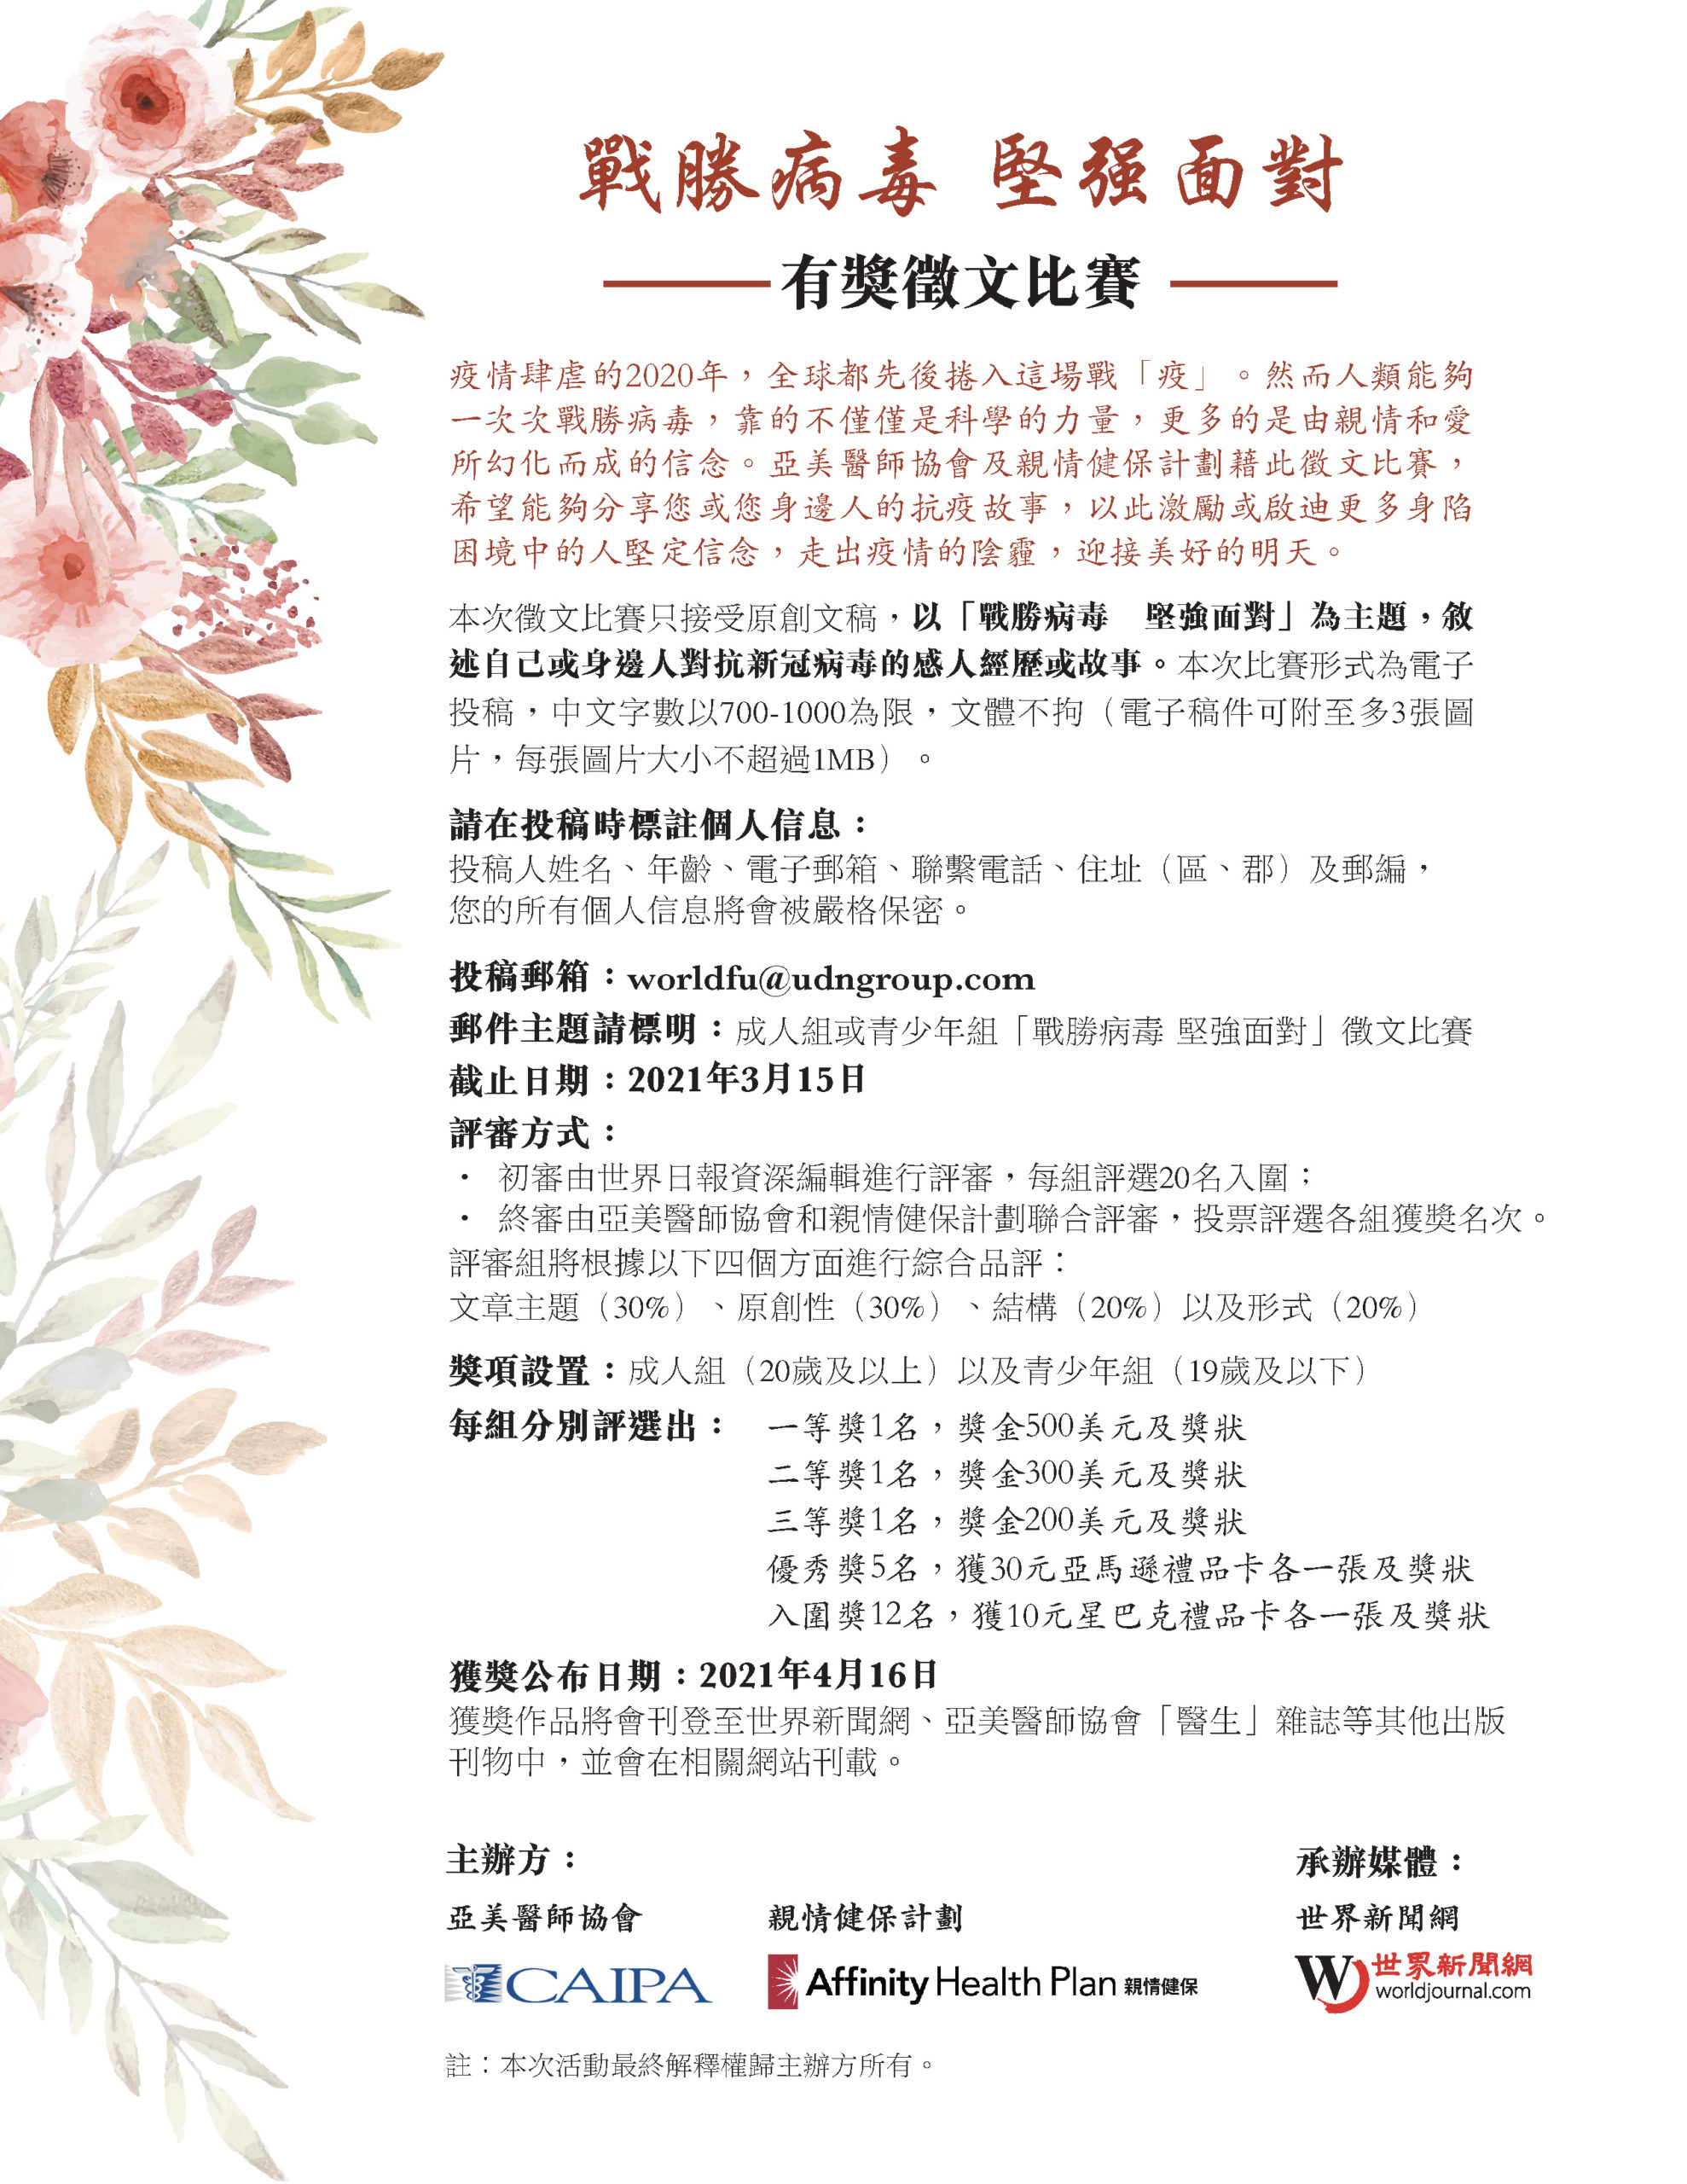 CAIPA - Chinese Essay Writing Contest